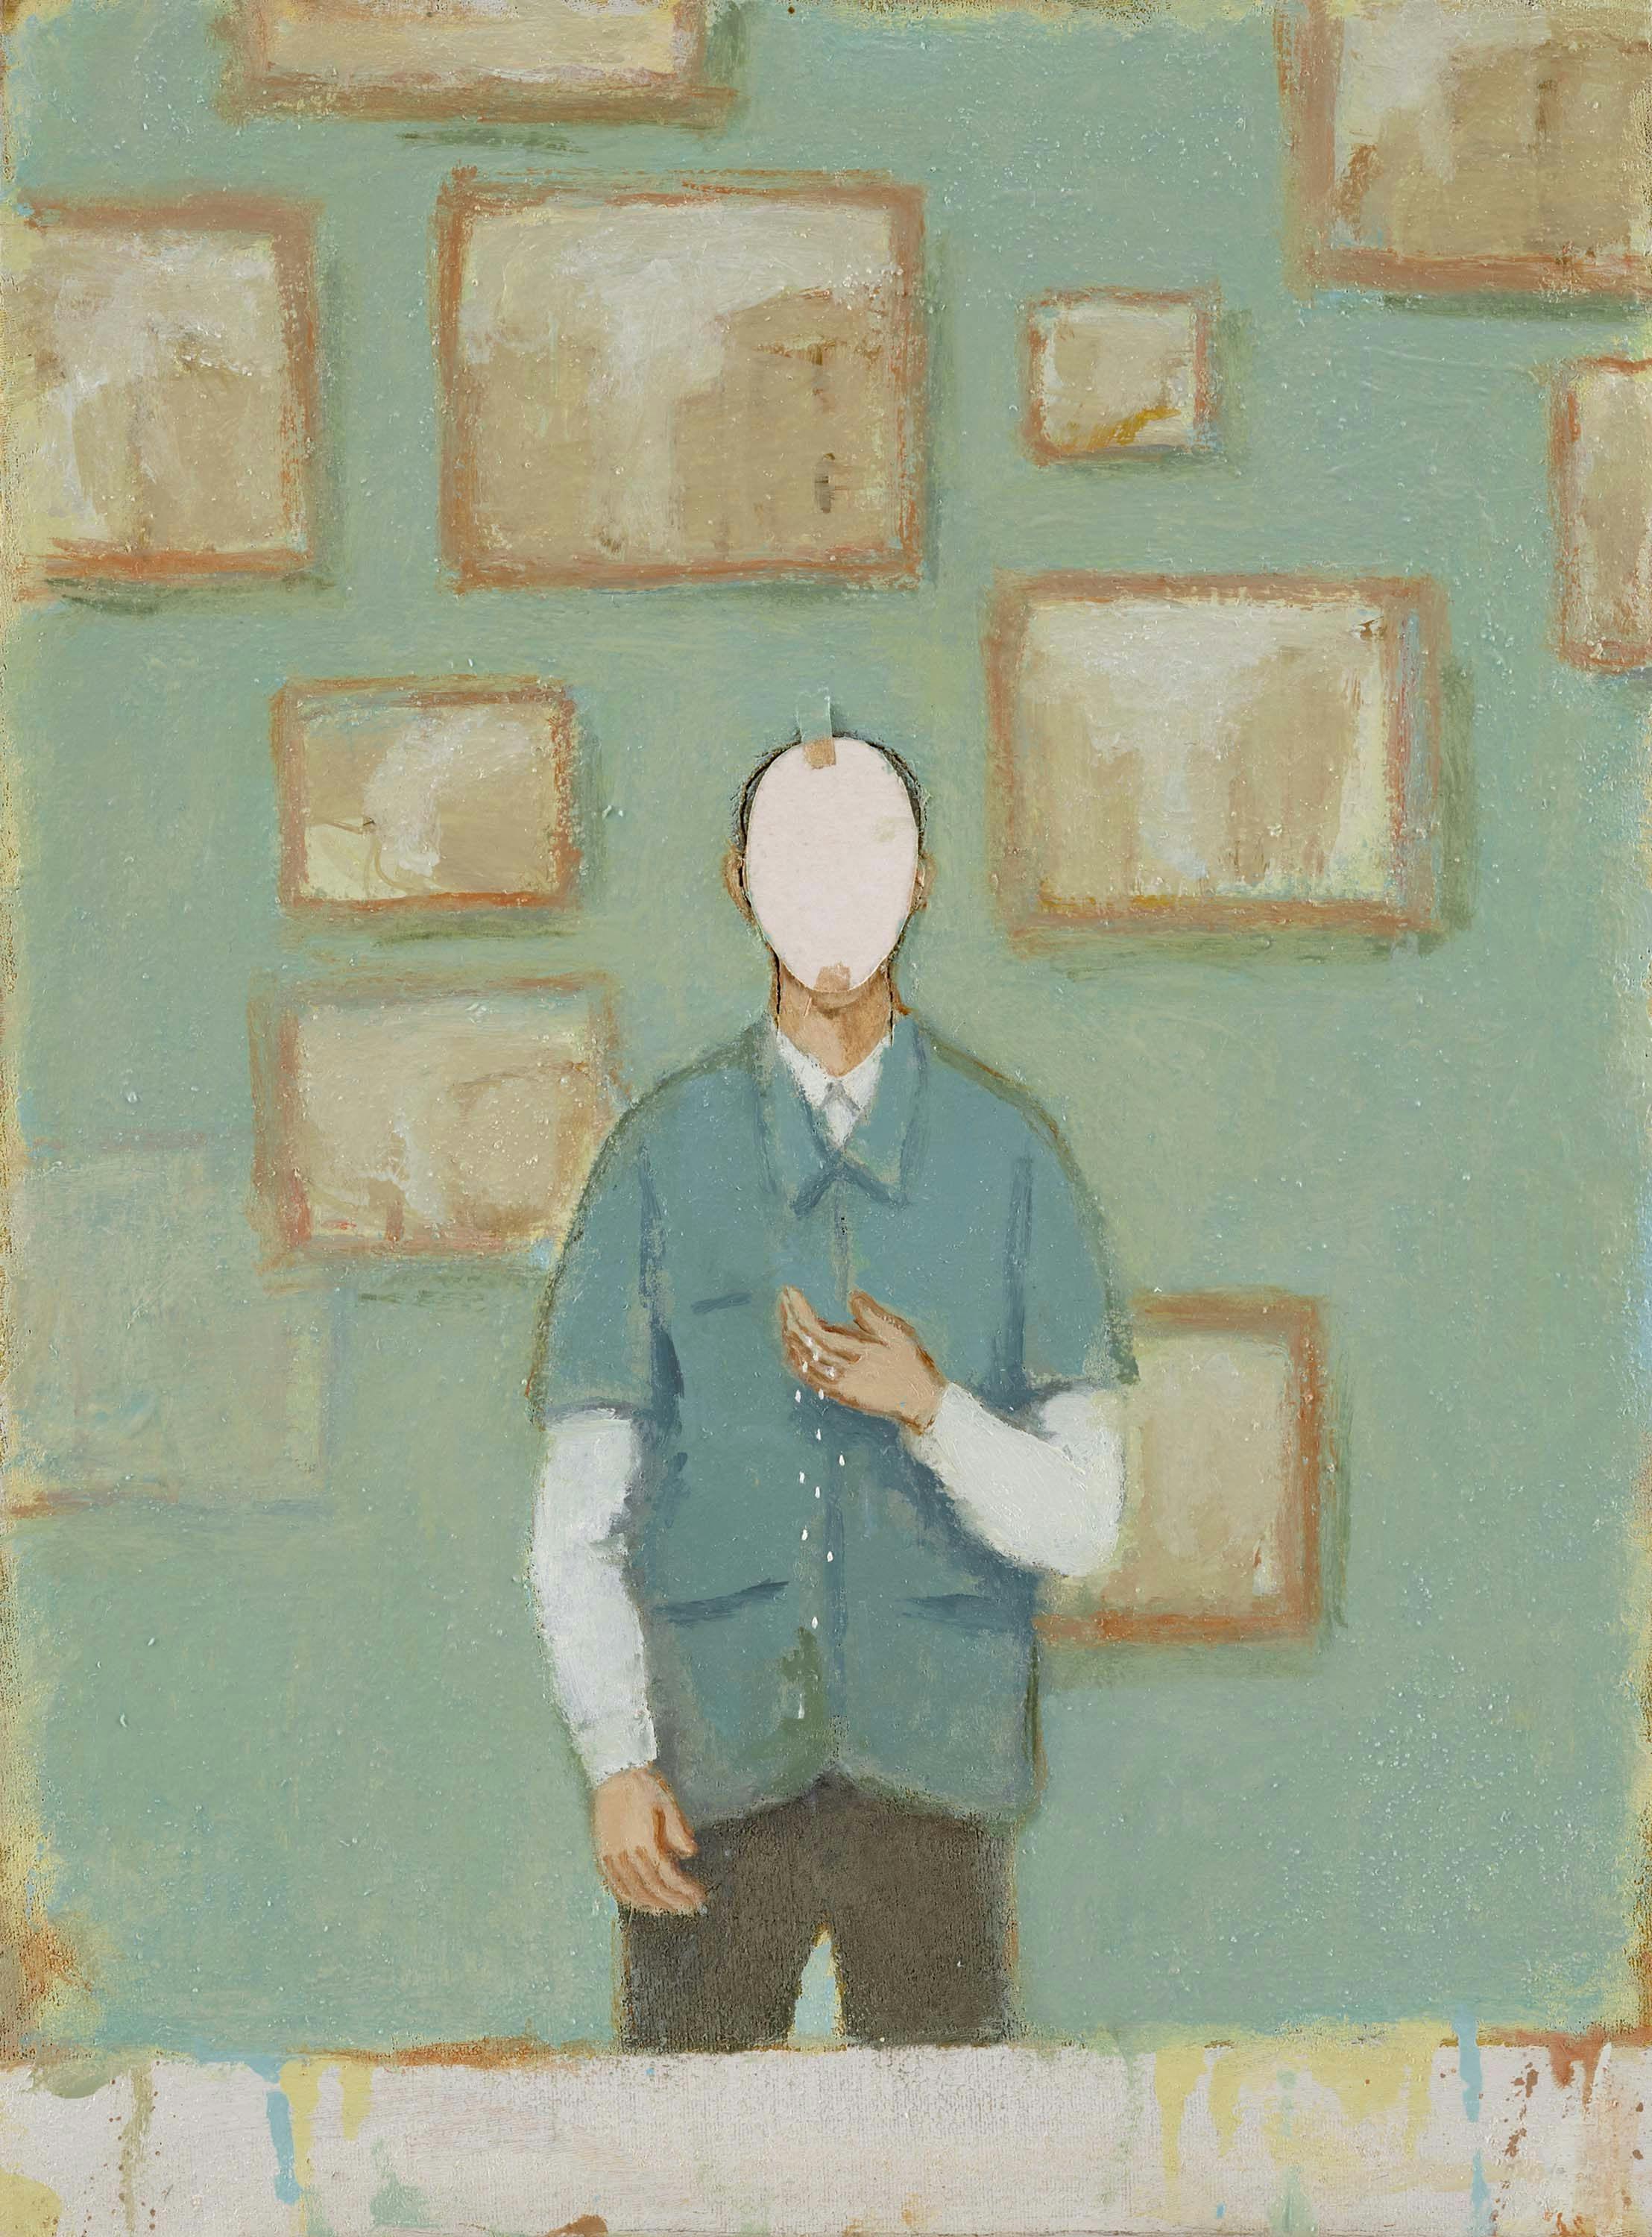 A detail from a painting by Francis Alÿs, called Untitled (Self-Portrait), 1995 to 1996.